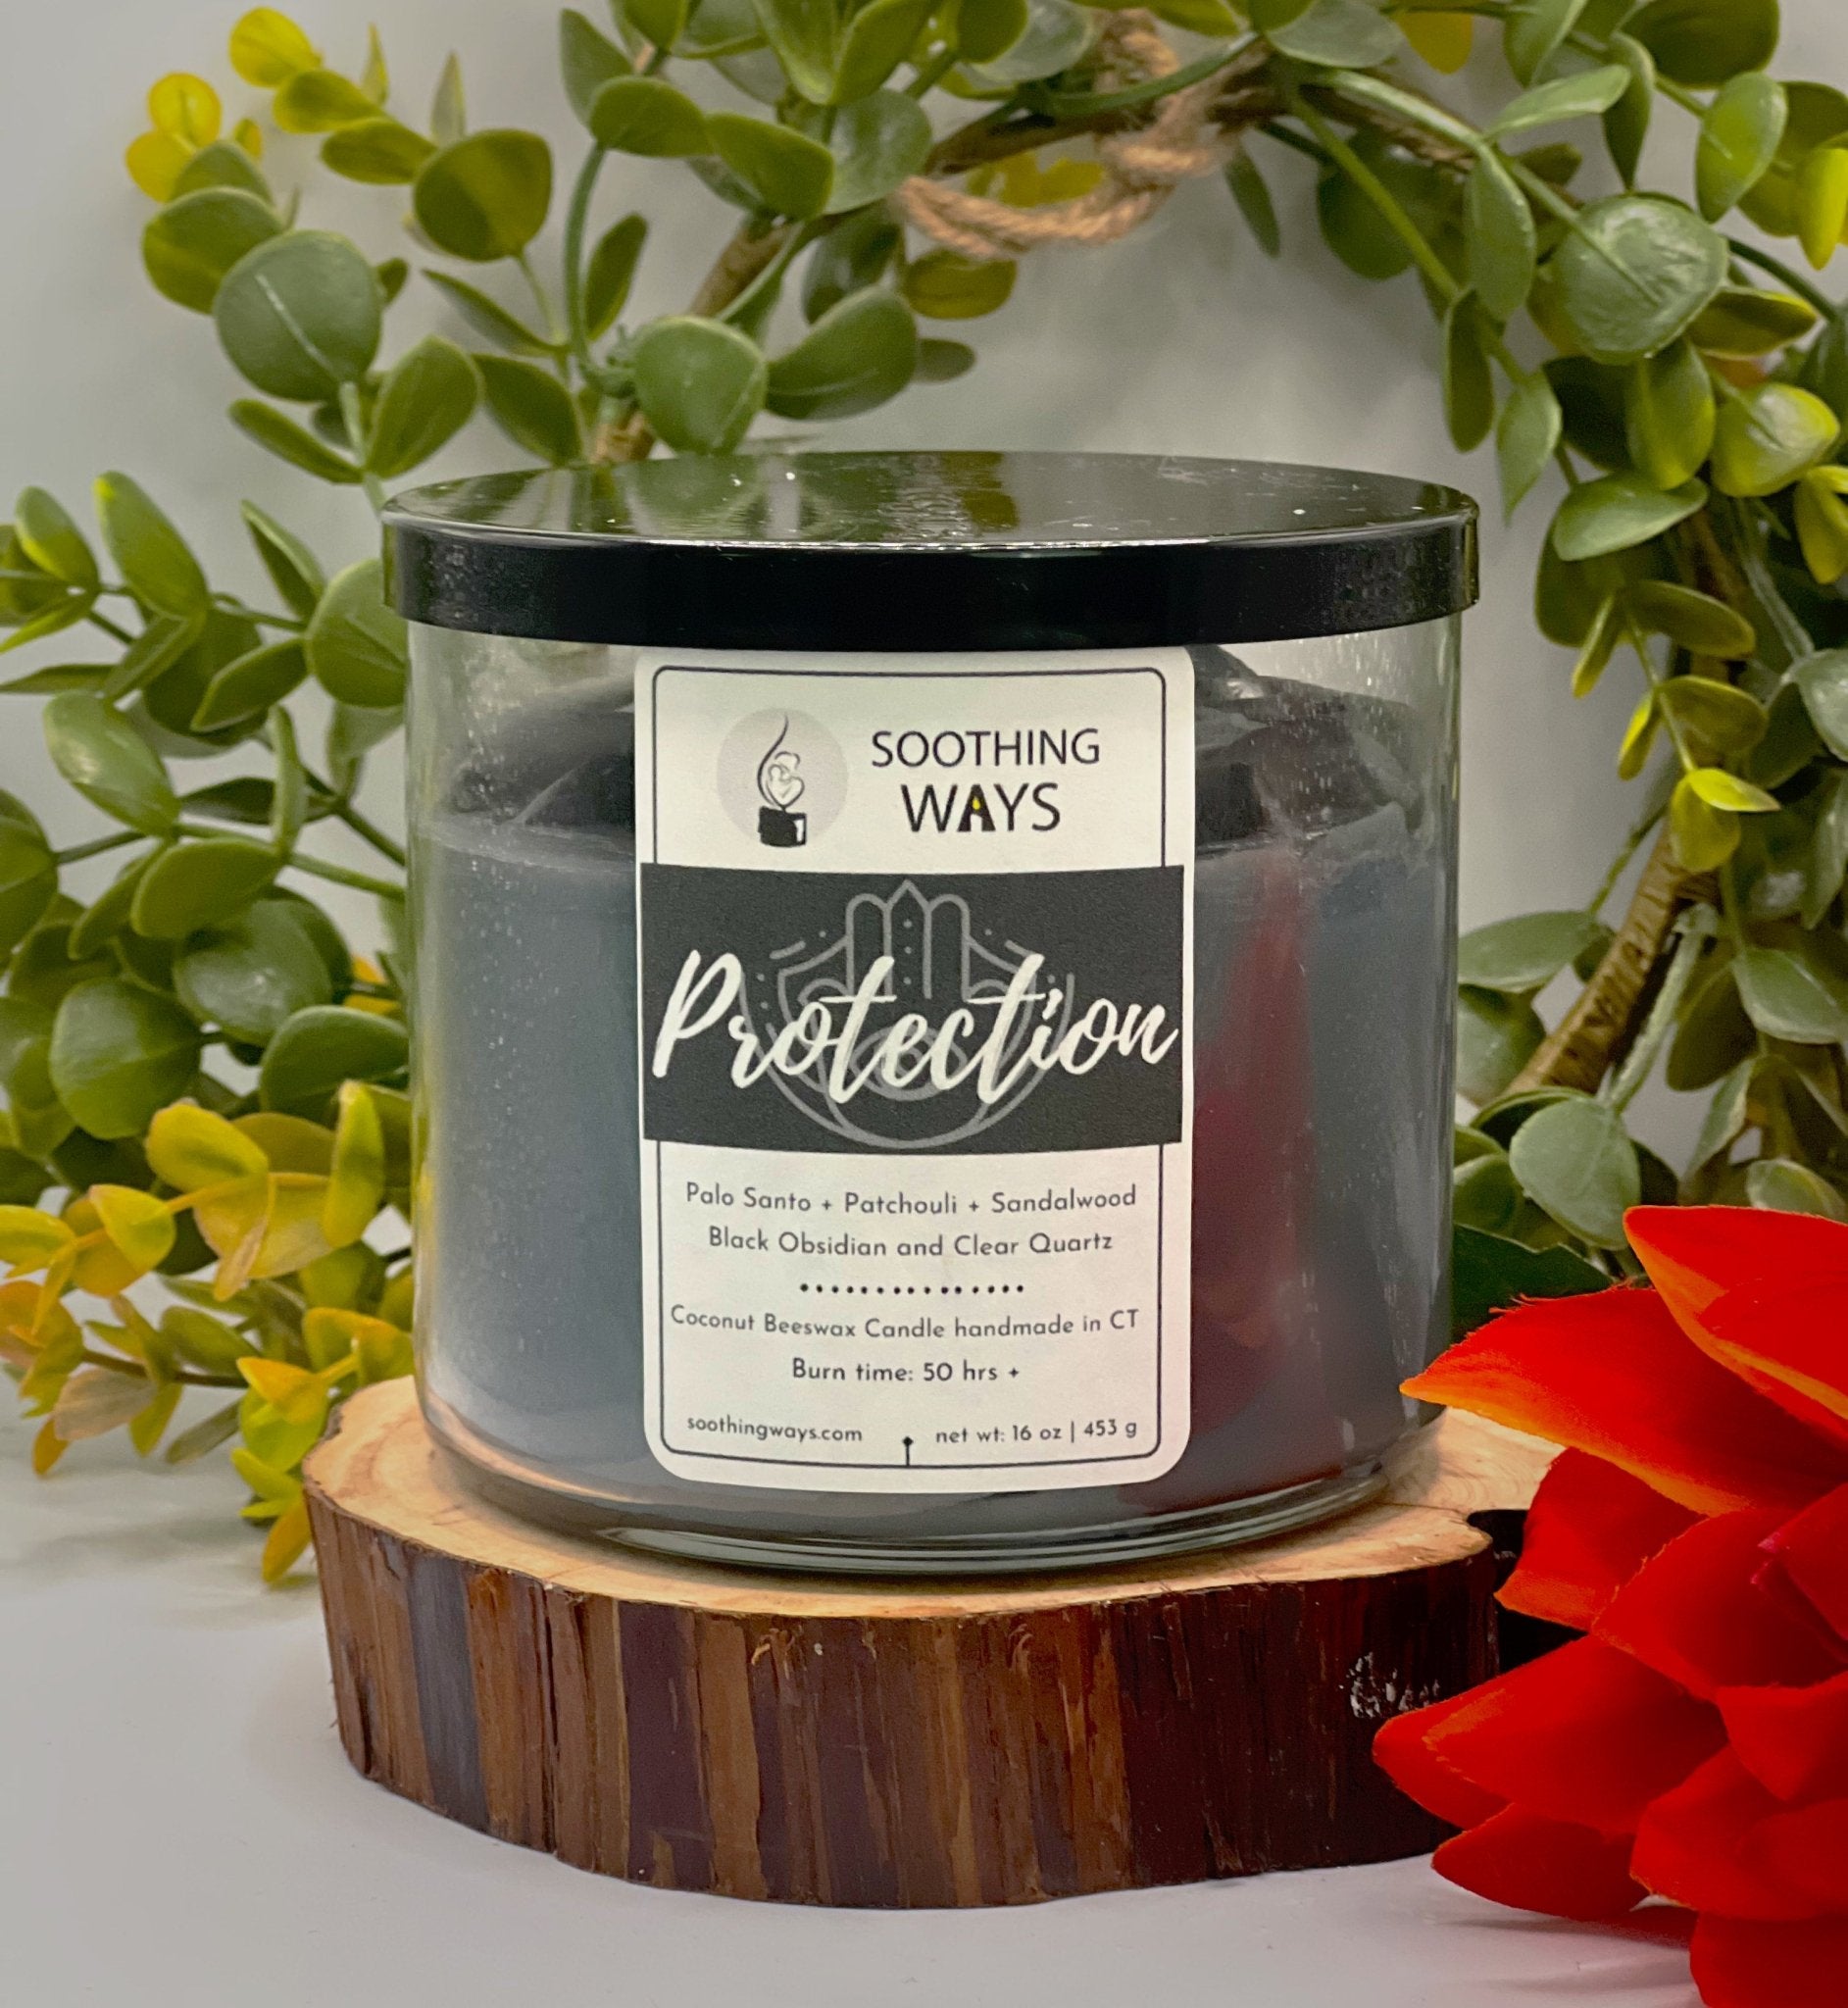 Protection 16 oz Candle - Soothing Ways